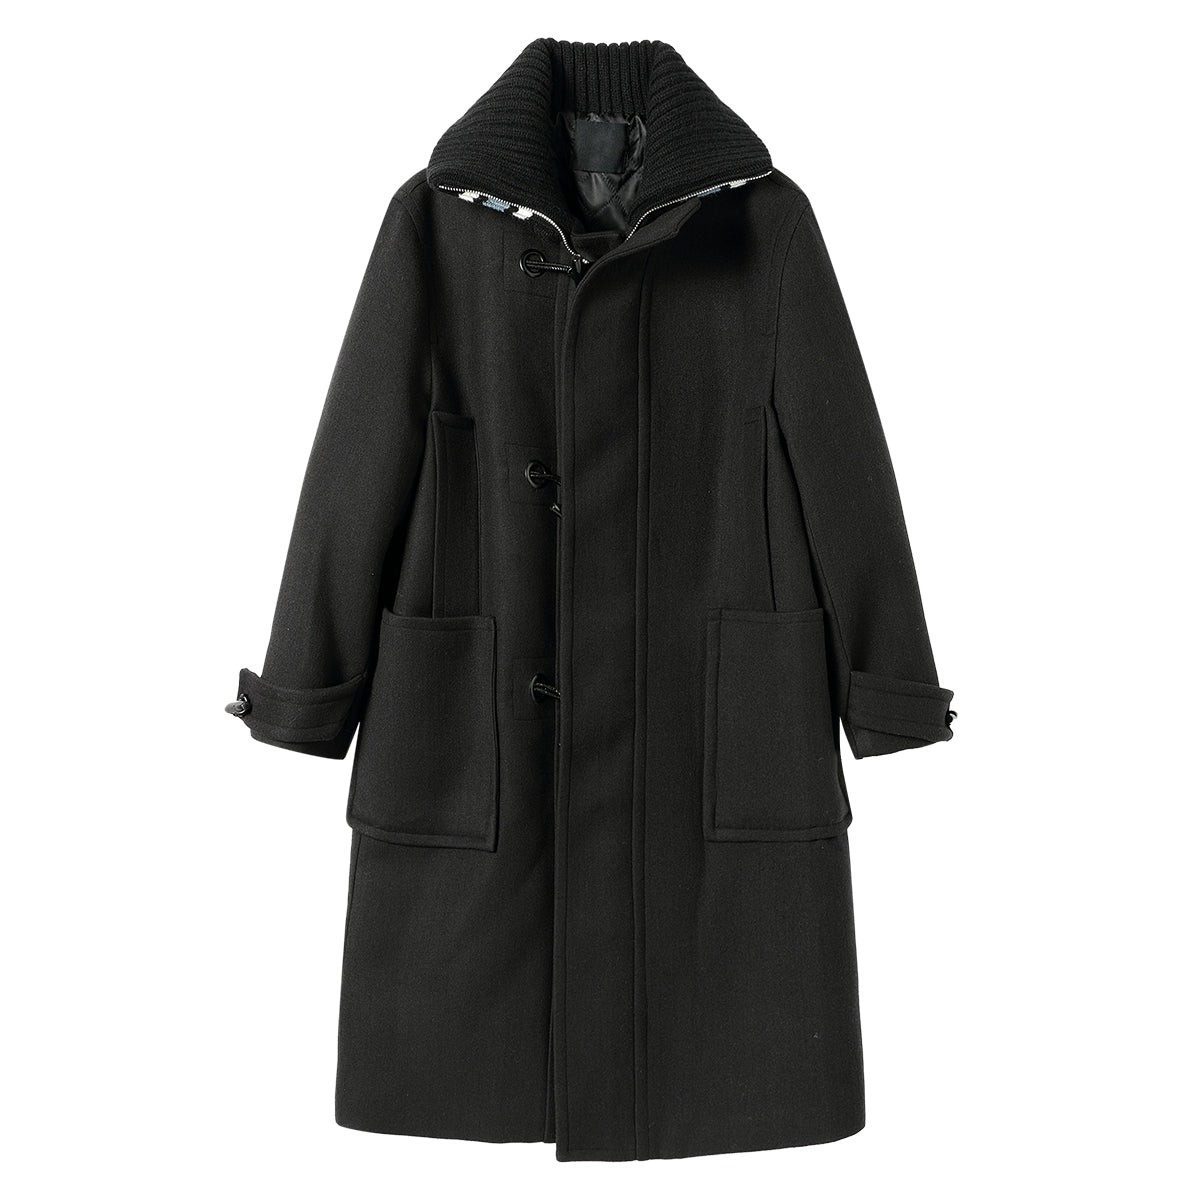 BAKUCO Korean version of the heavy industry stand-up collar woolen coat with thick padded warm tweed jacket